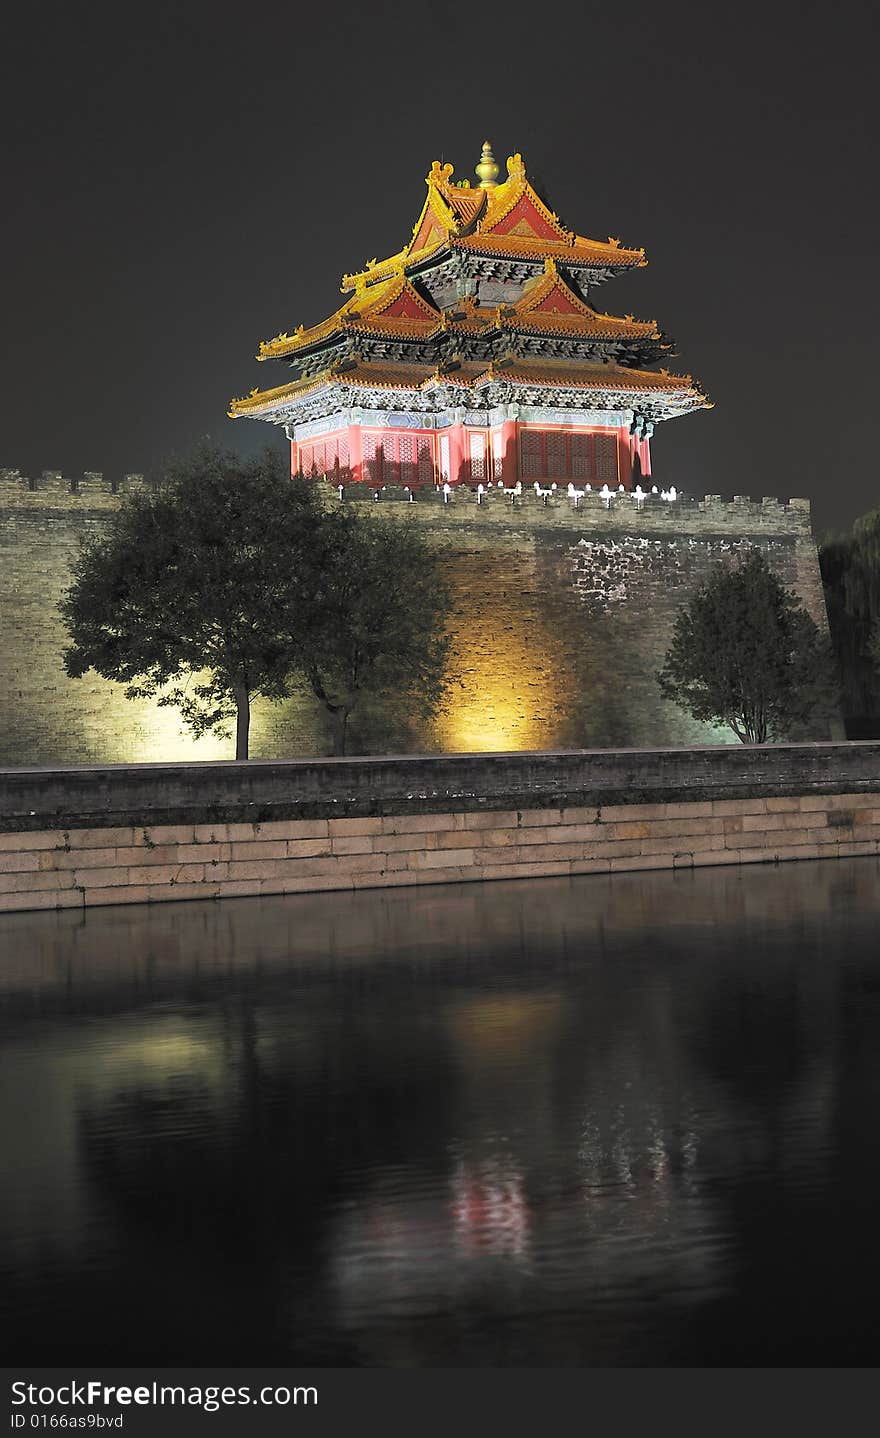 Watchtower at a corner of a city wall in beijing at night. Watchtower at a corner of a city wall in beijing at night